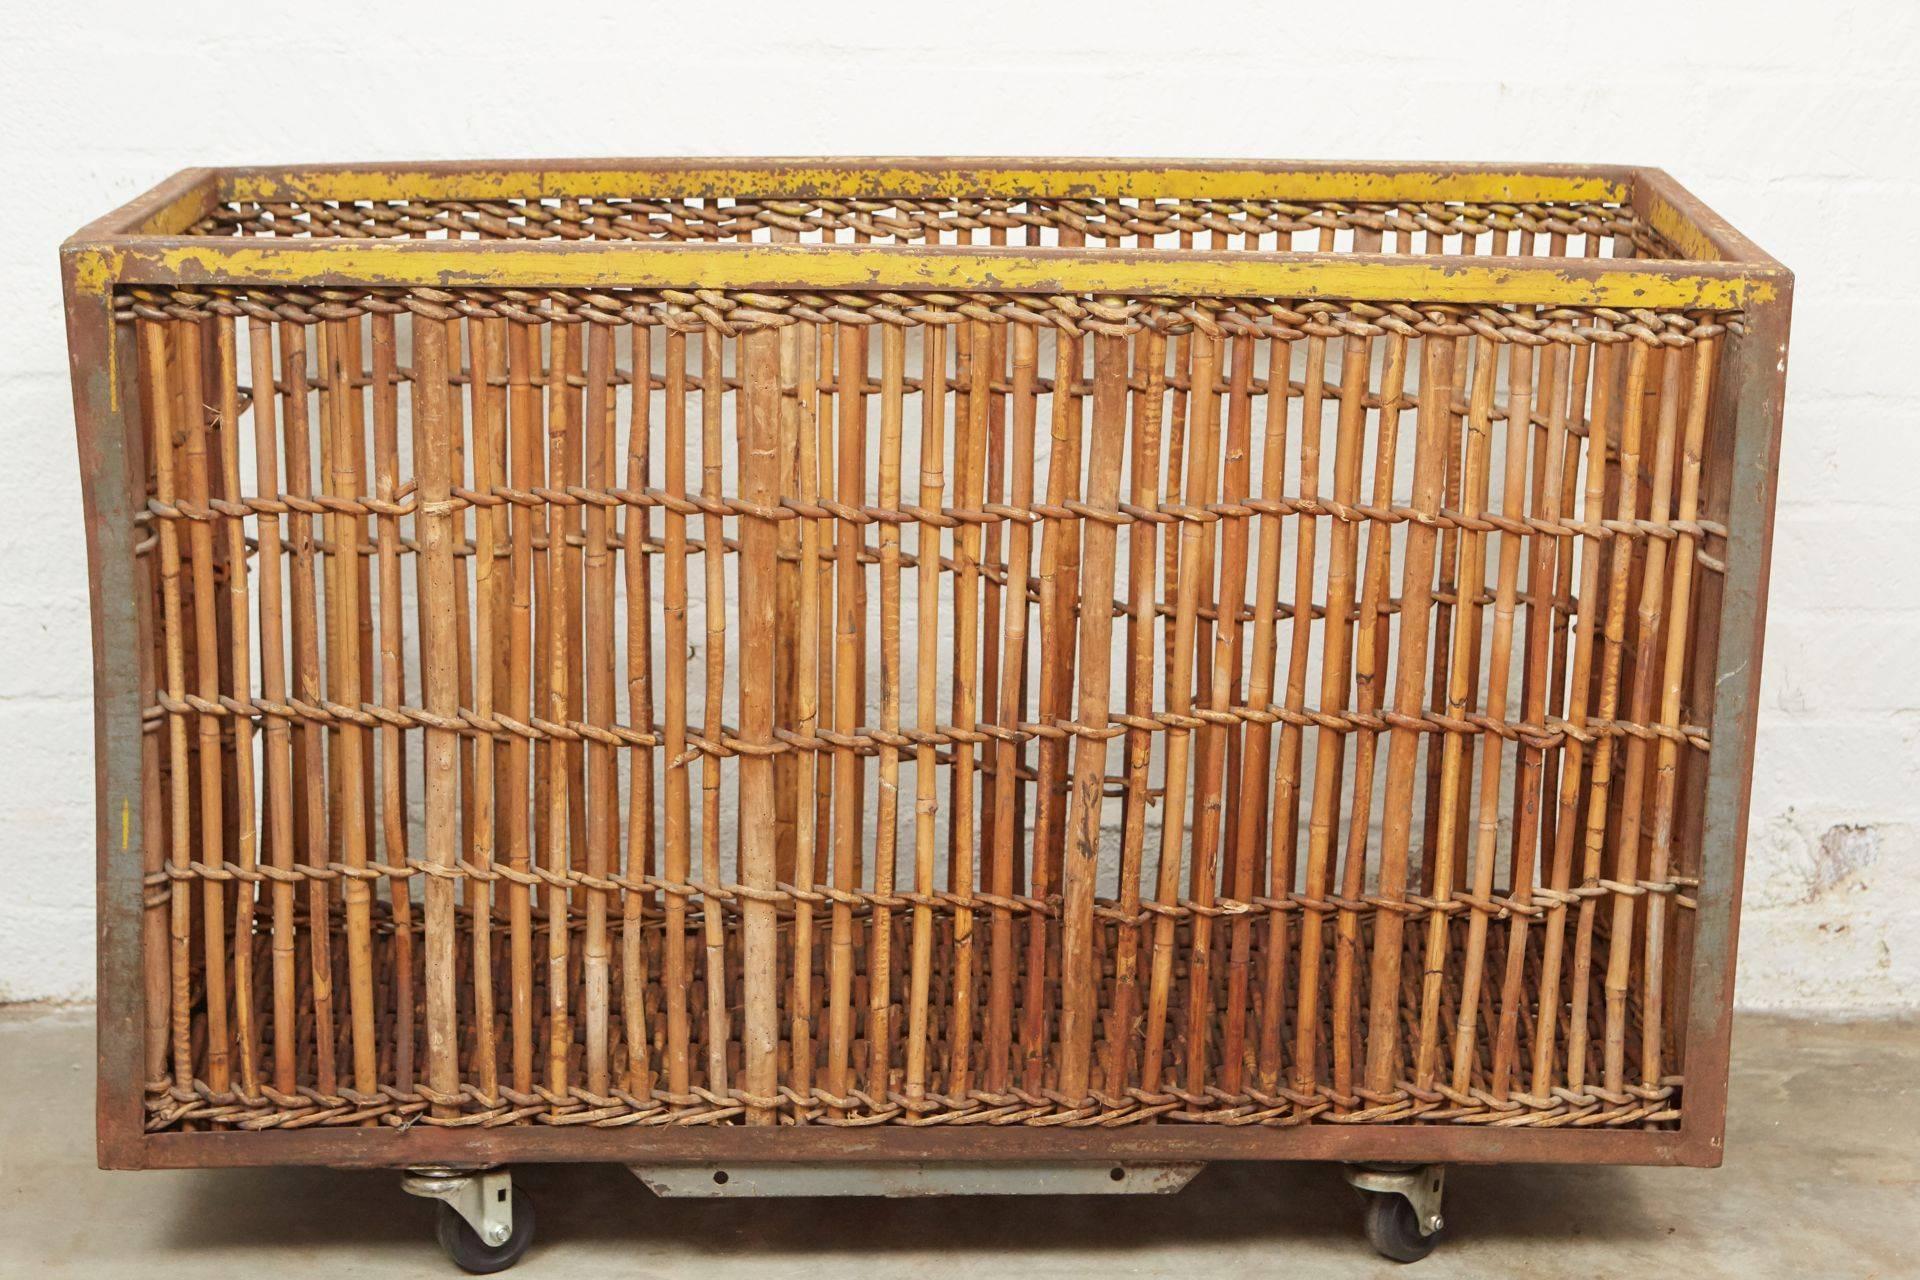 This great piece, circa 1900, has bamboo and wood woven sides and bottom on an iron frame with remnants of yellow and black paint. There is a hand-lettered tag on one side of the cart as well. The cart is sits on casters with wheels. Functional and